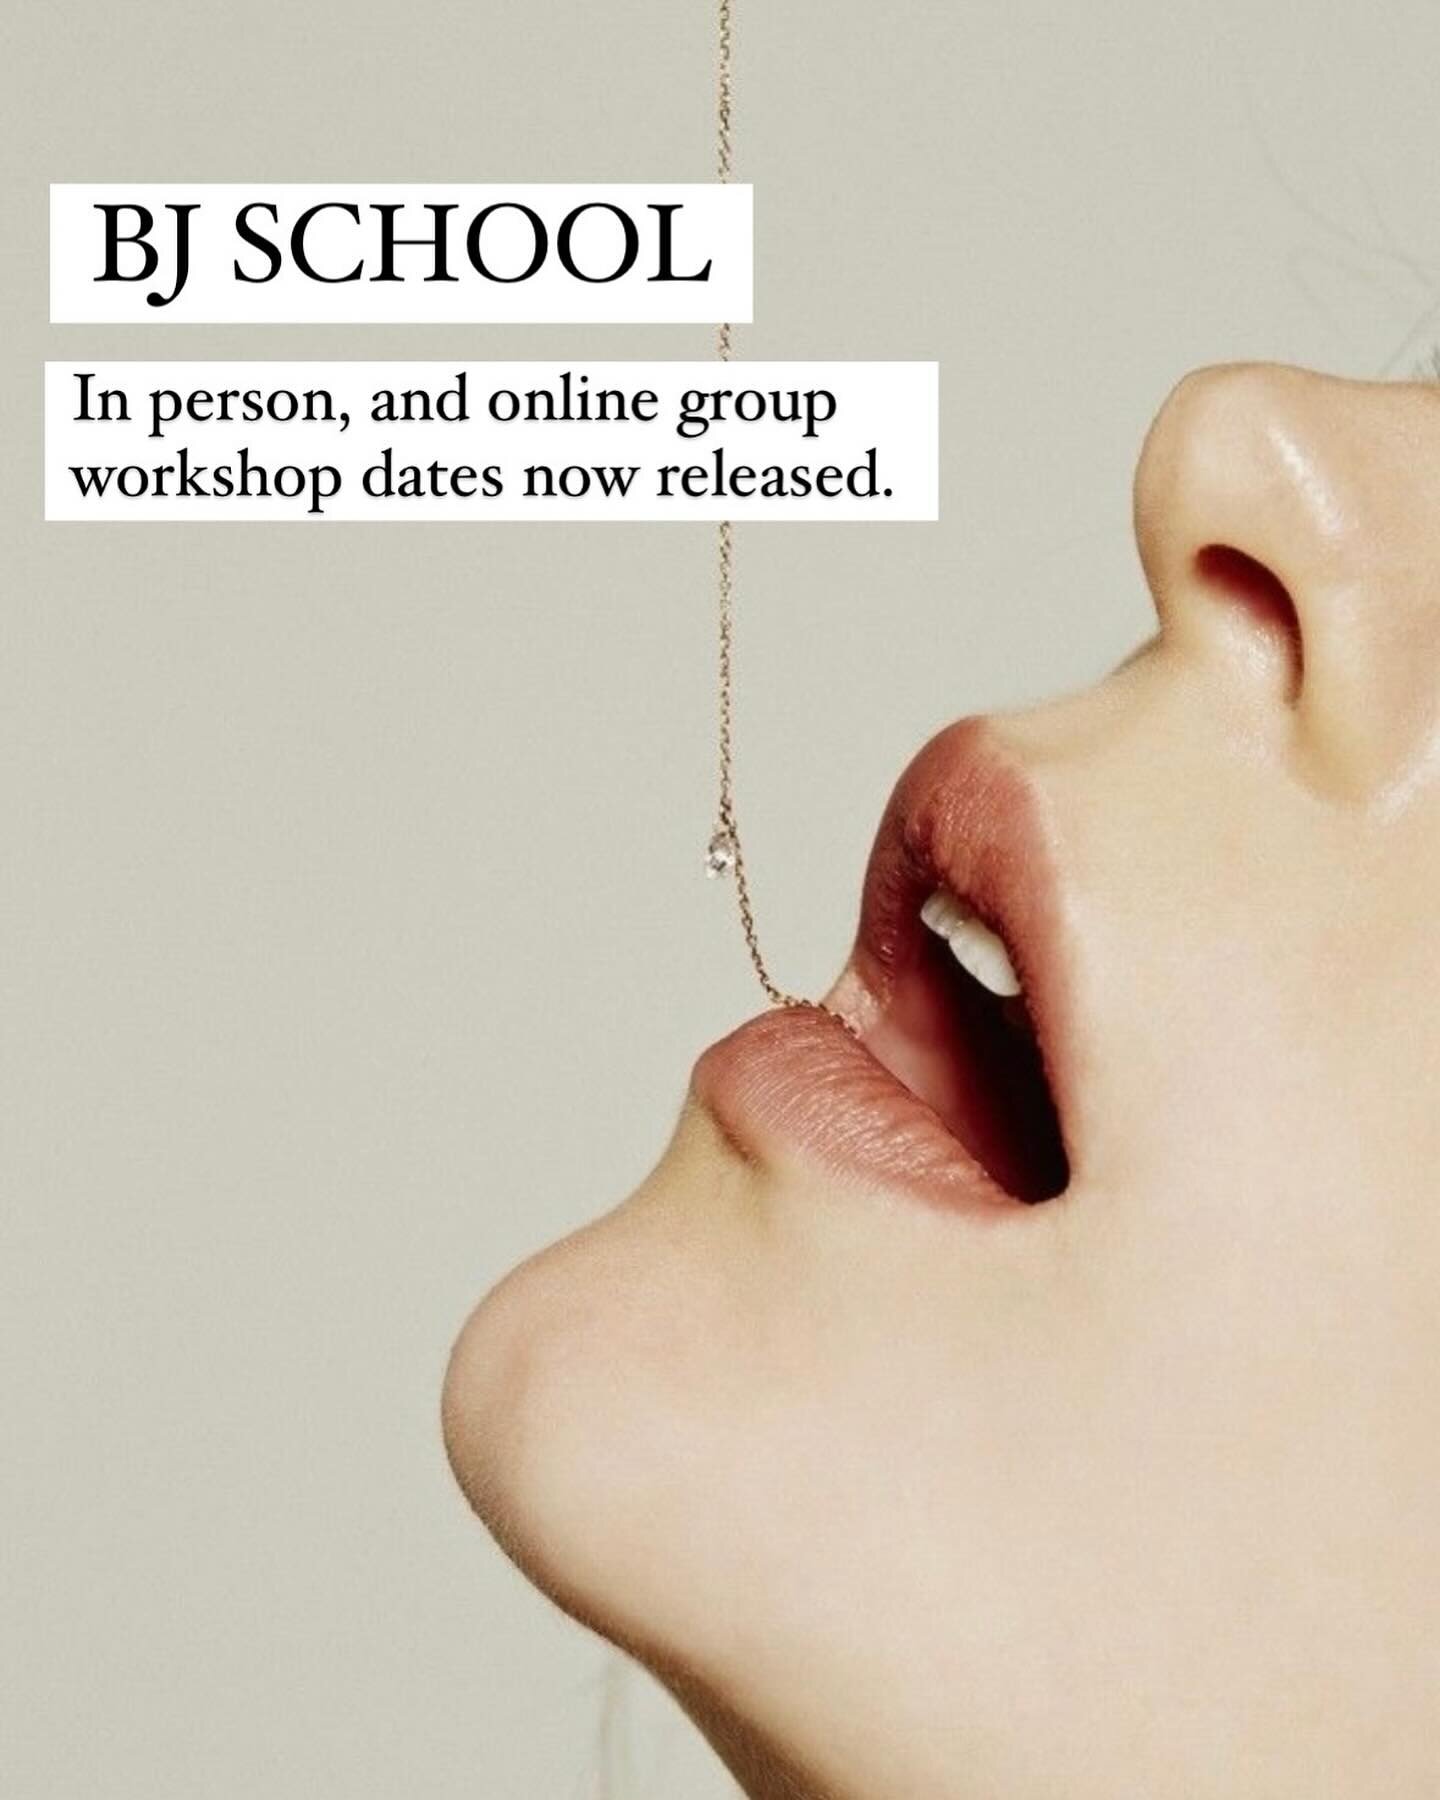 Beloveds! Good news!! 

BJ school is back! After AMAZING feedback from the first workshop, I am so happy to release dates for upcoming workshops, both in person and online. 

All time zones are covered, so click the link to check yours&hellip; all wo